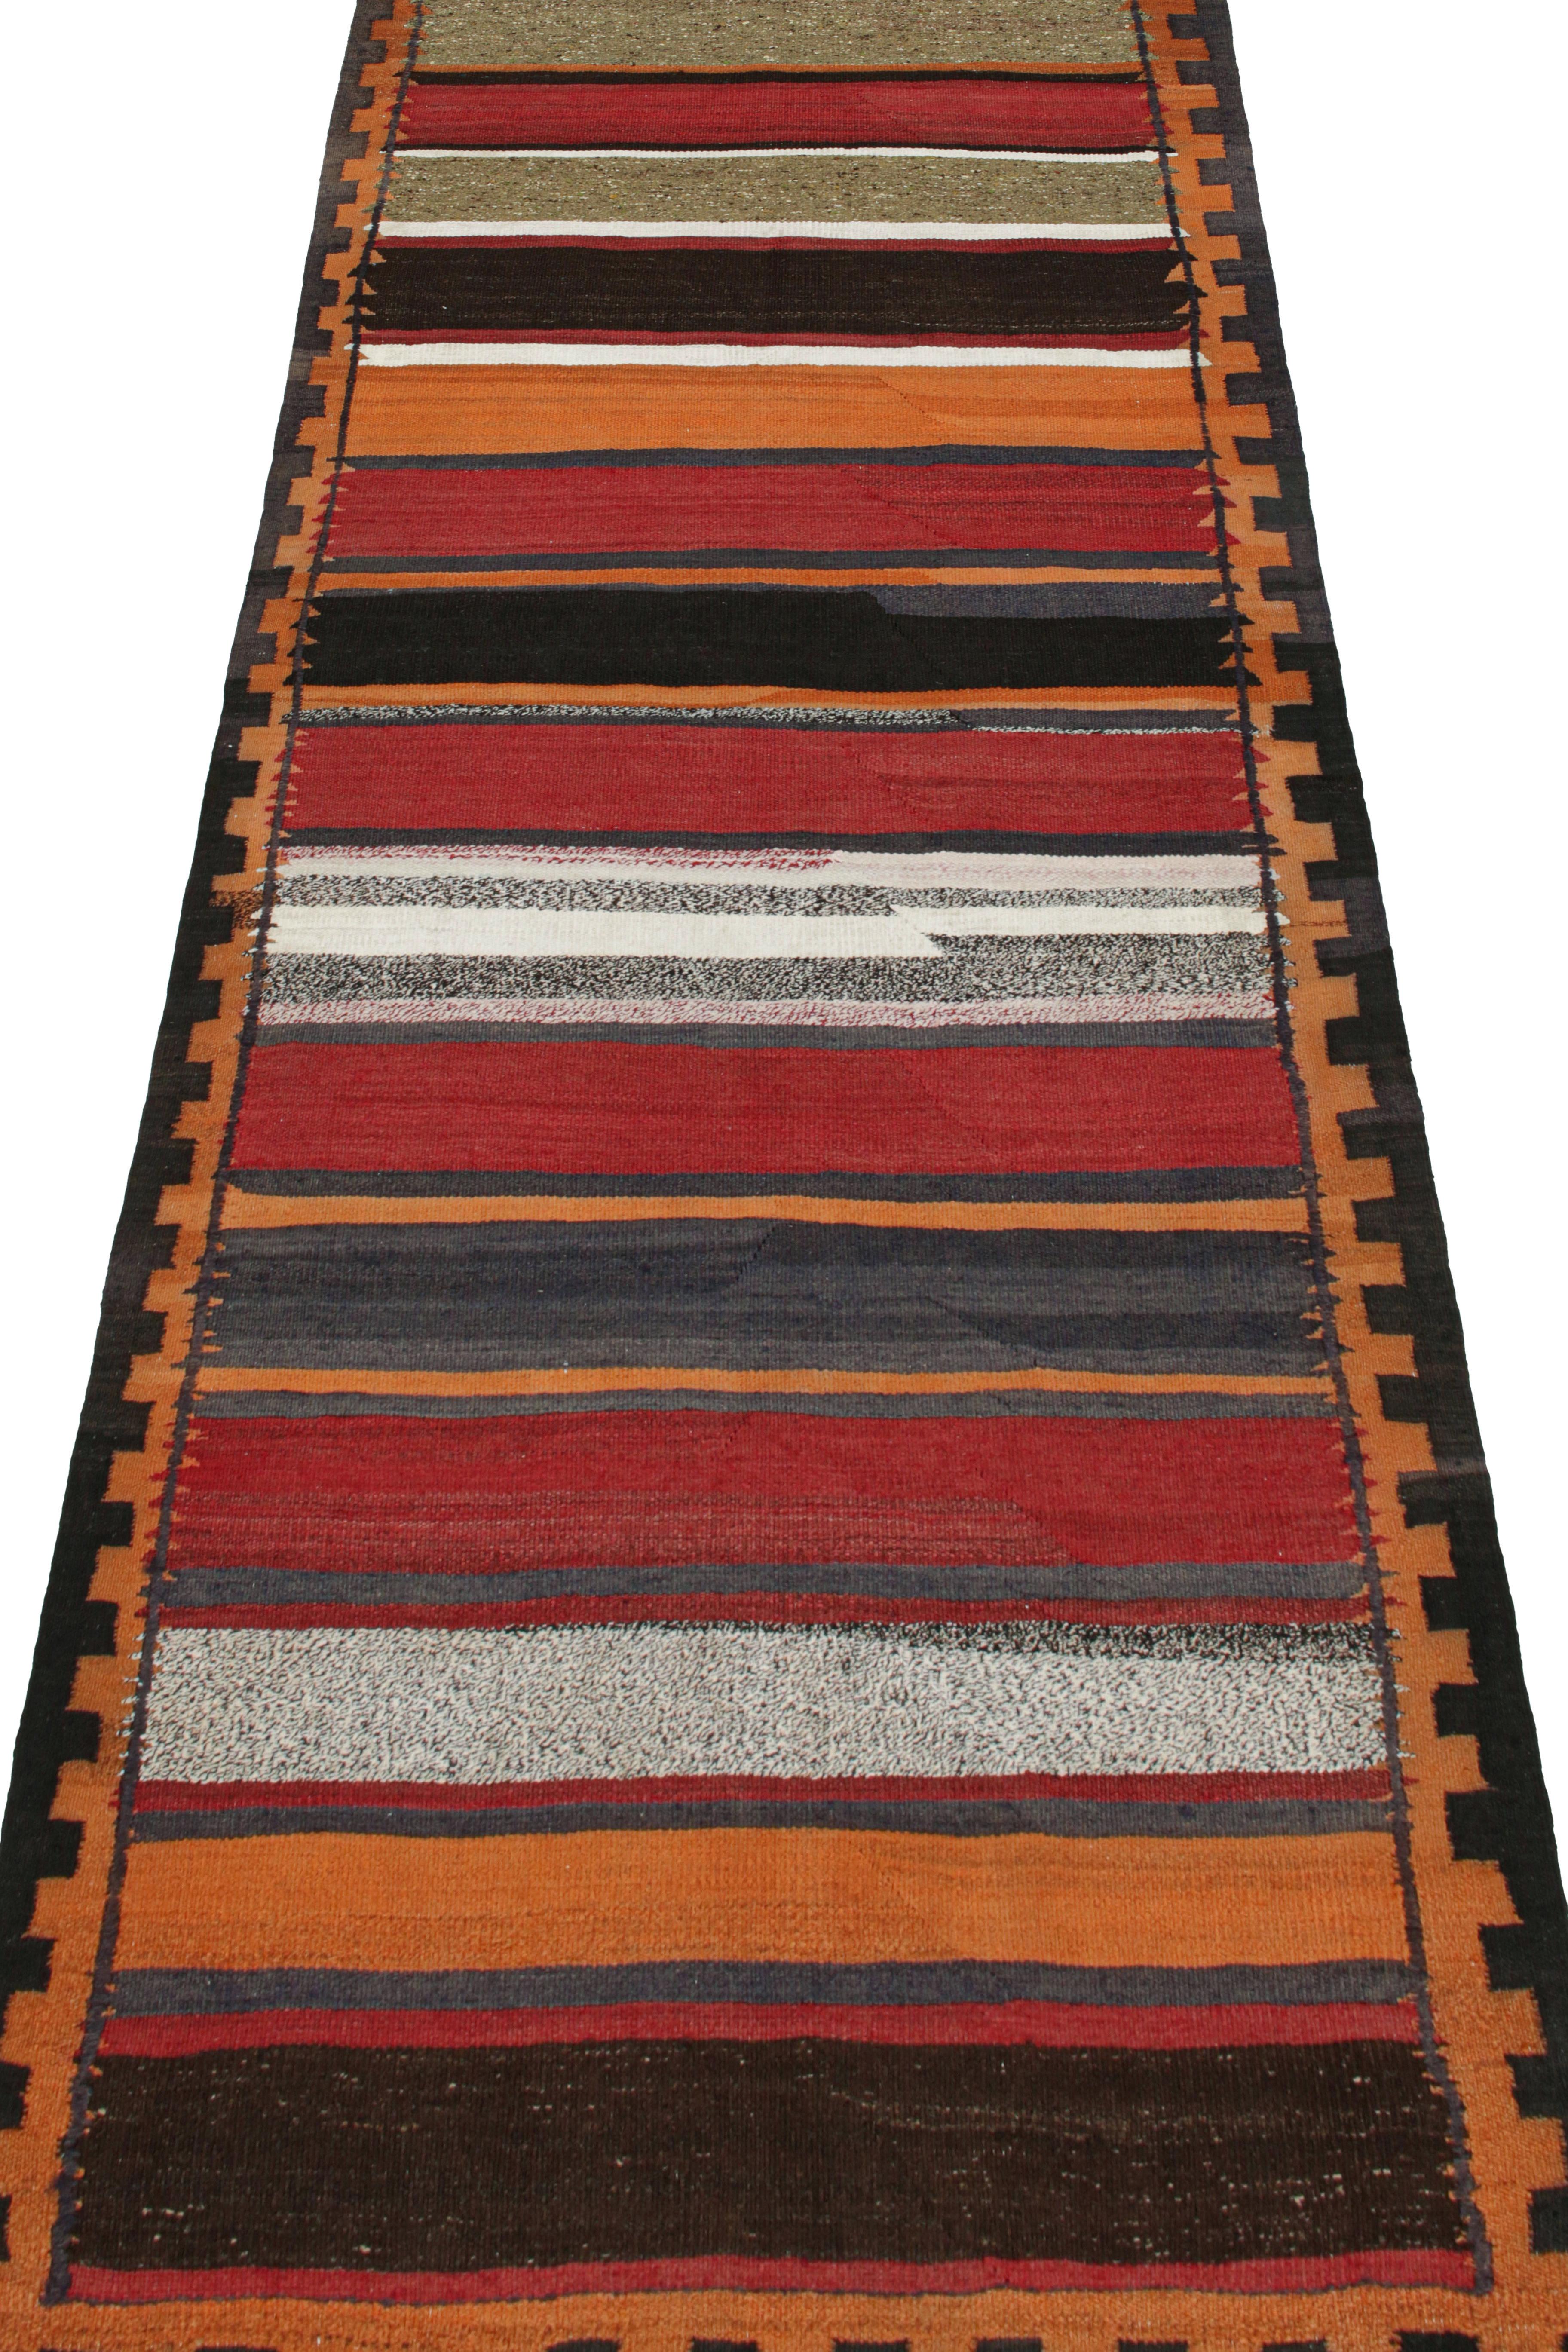 Vintage Shahsavan Persian Kilim in Polychromatic Stripes In Good Condition For Sale In Long Island City, NY